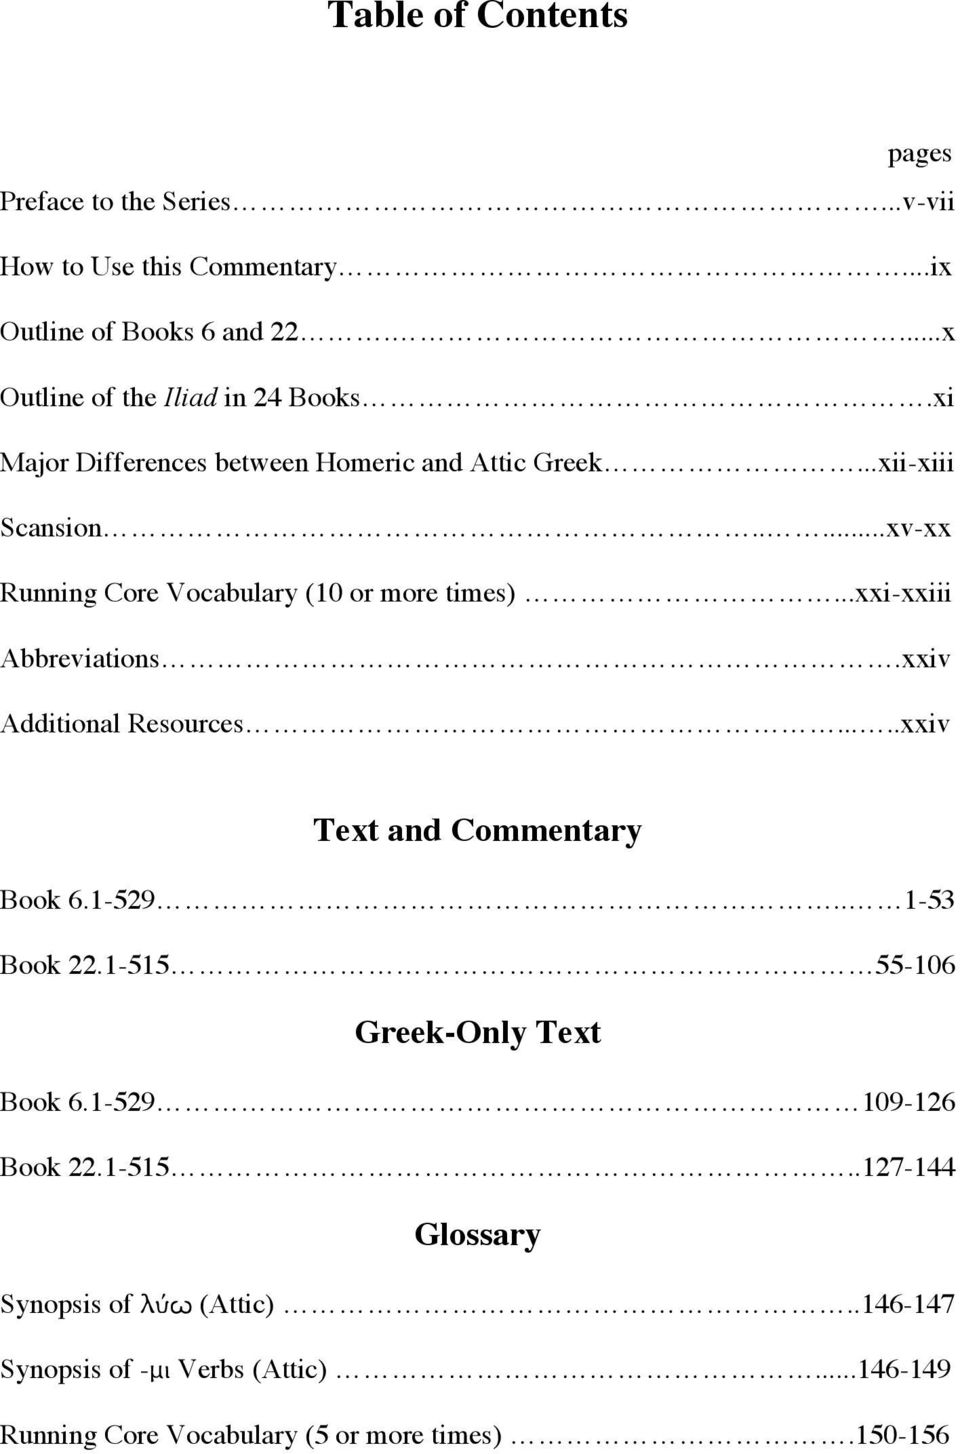 ..xxi-xxiii Abbreviations.xxiv Additional Resources.....xxiv Text and Commentary Book 6.1-529.. 1-53 Book 22.1-515 55-106 Greek-Only Text Book 6.